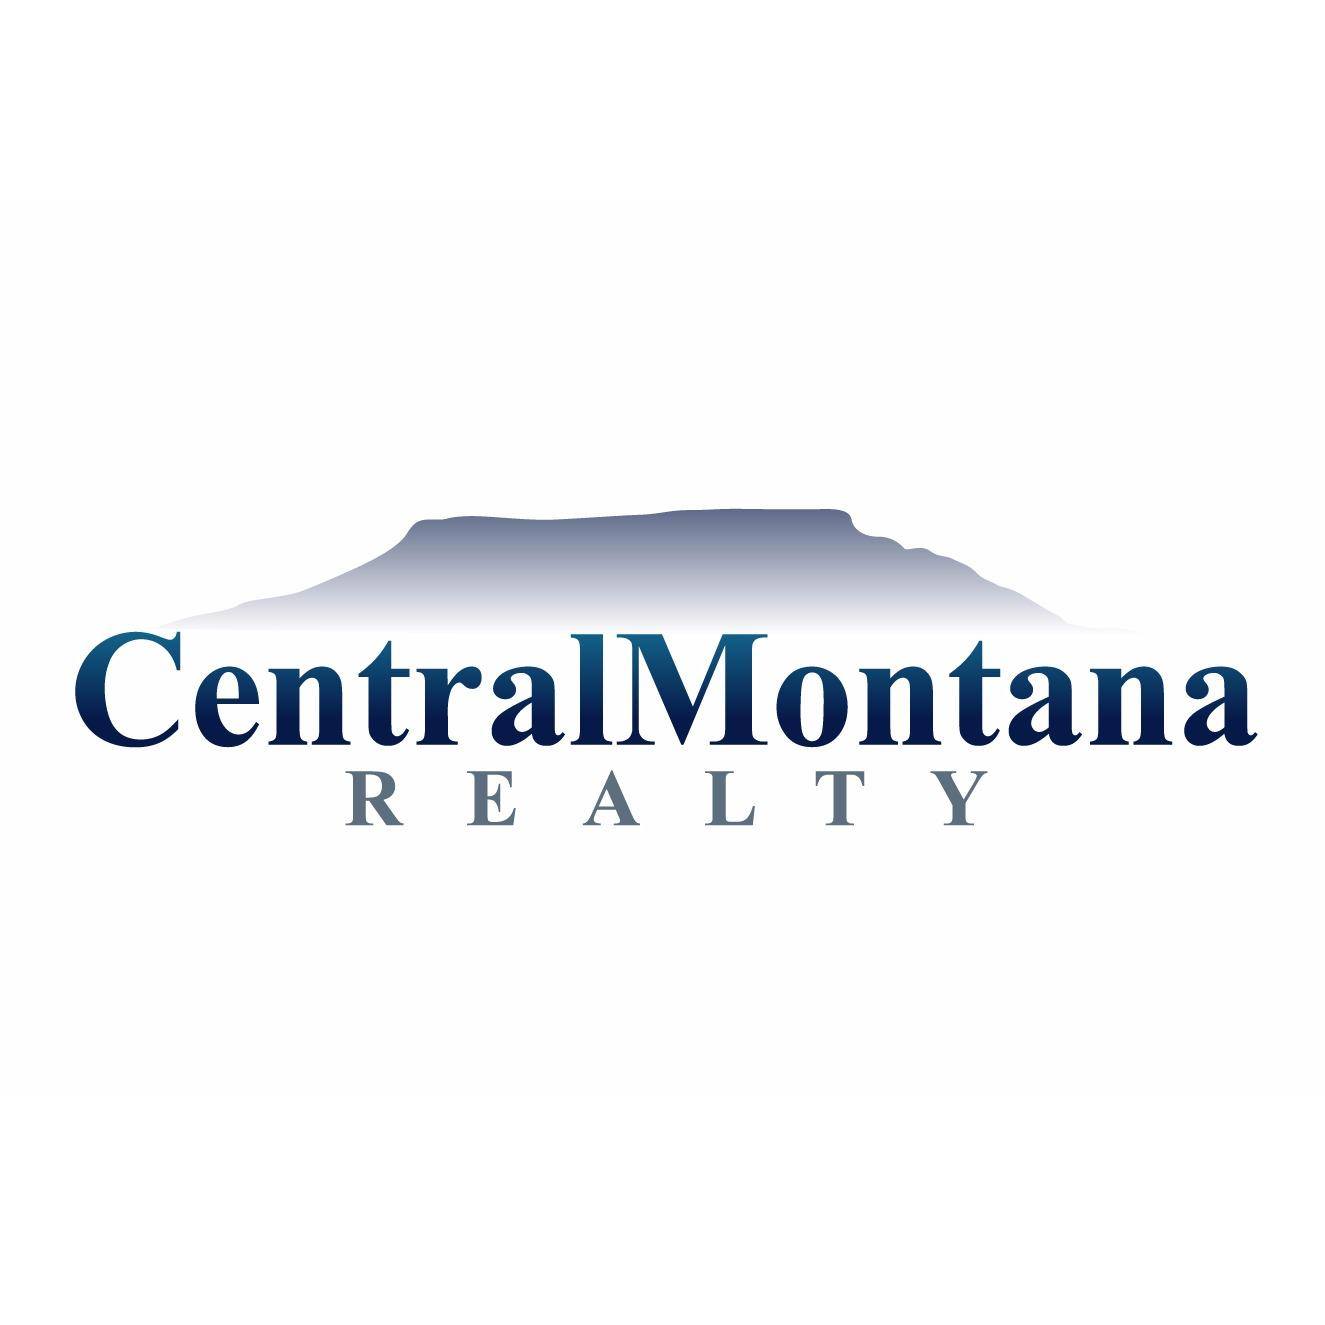 Business logo of Central Montana Realty